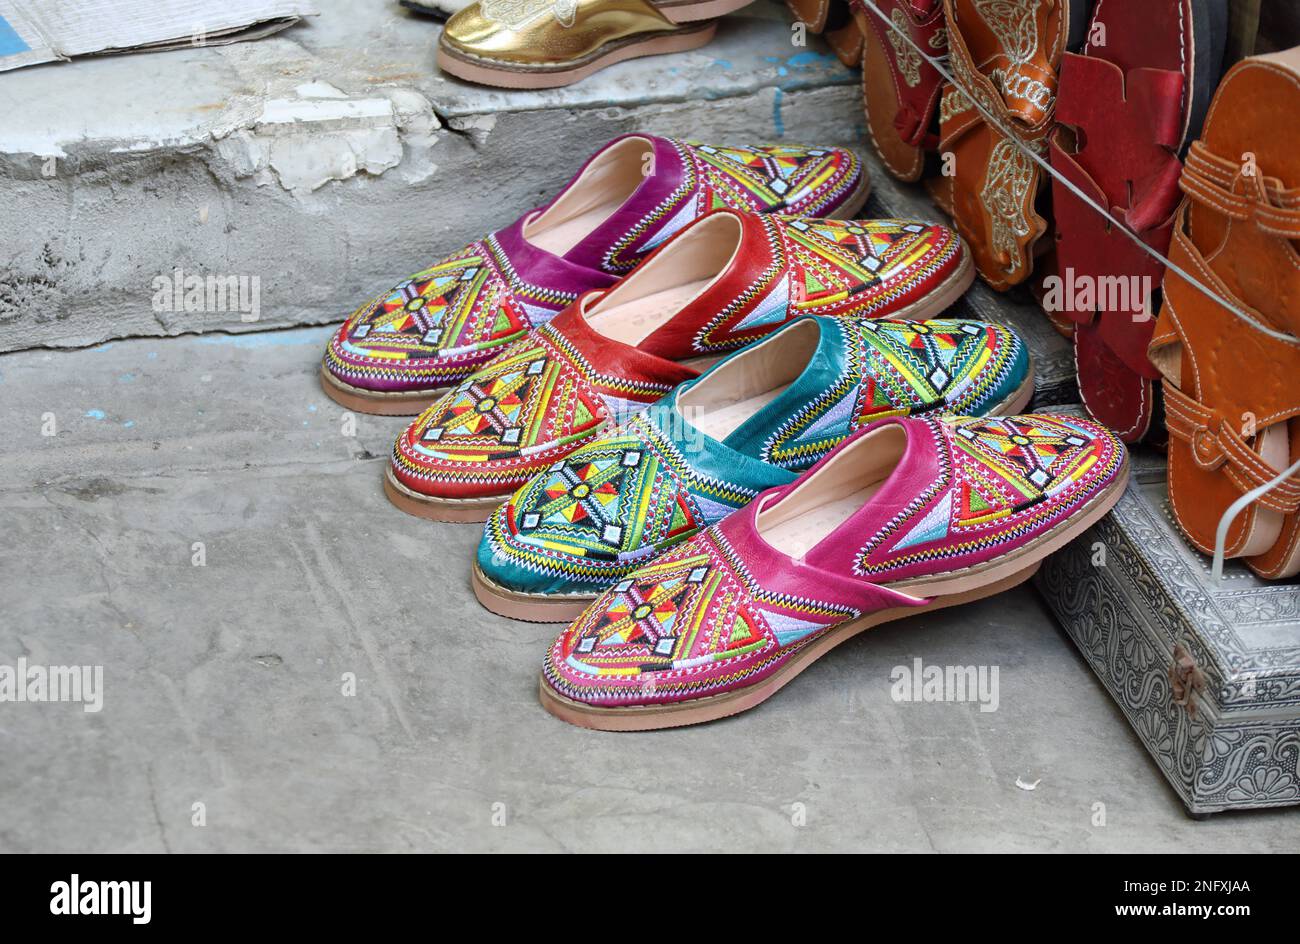 Traditional slippers for sale in North Africa Stock Photo